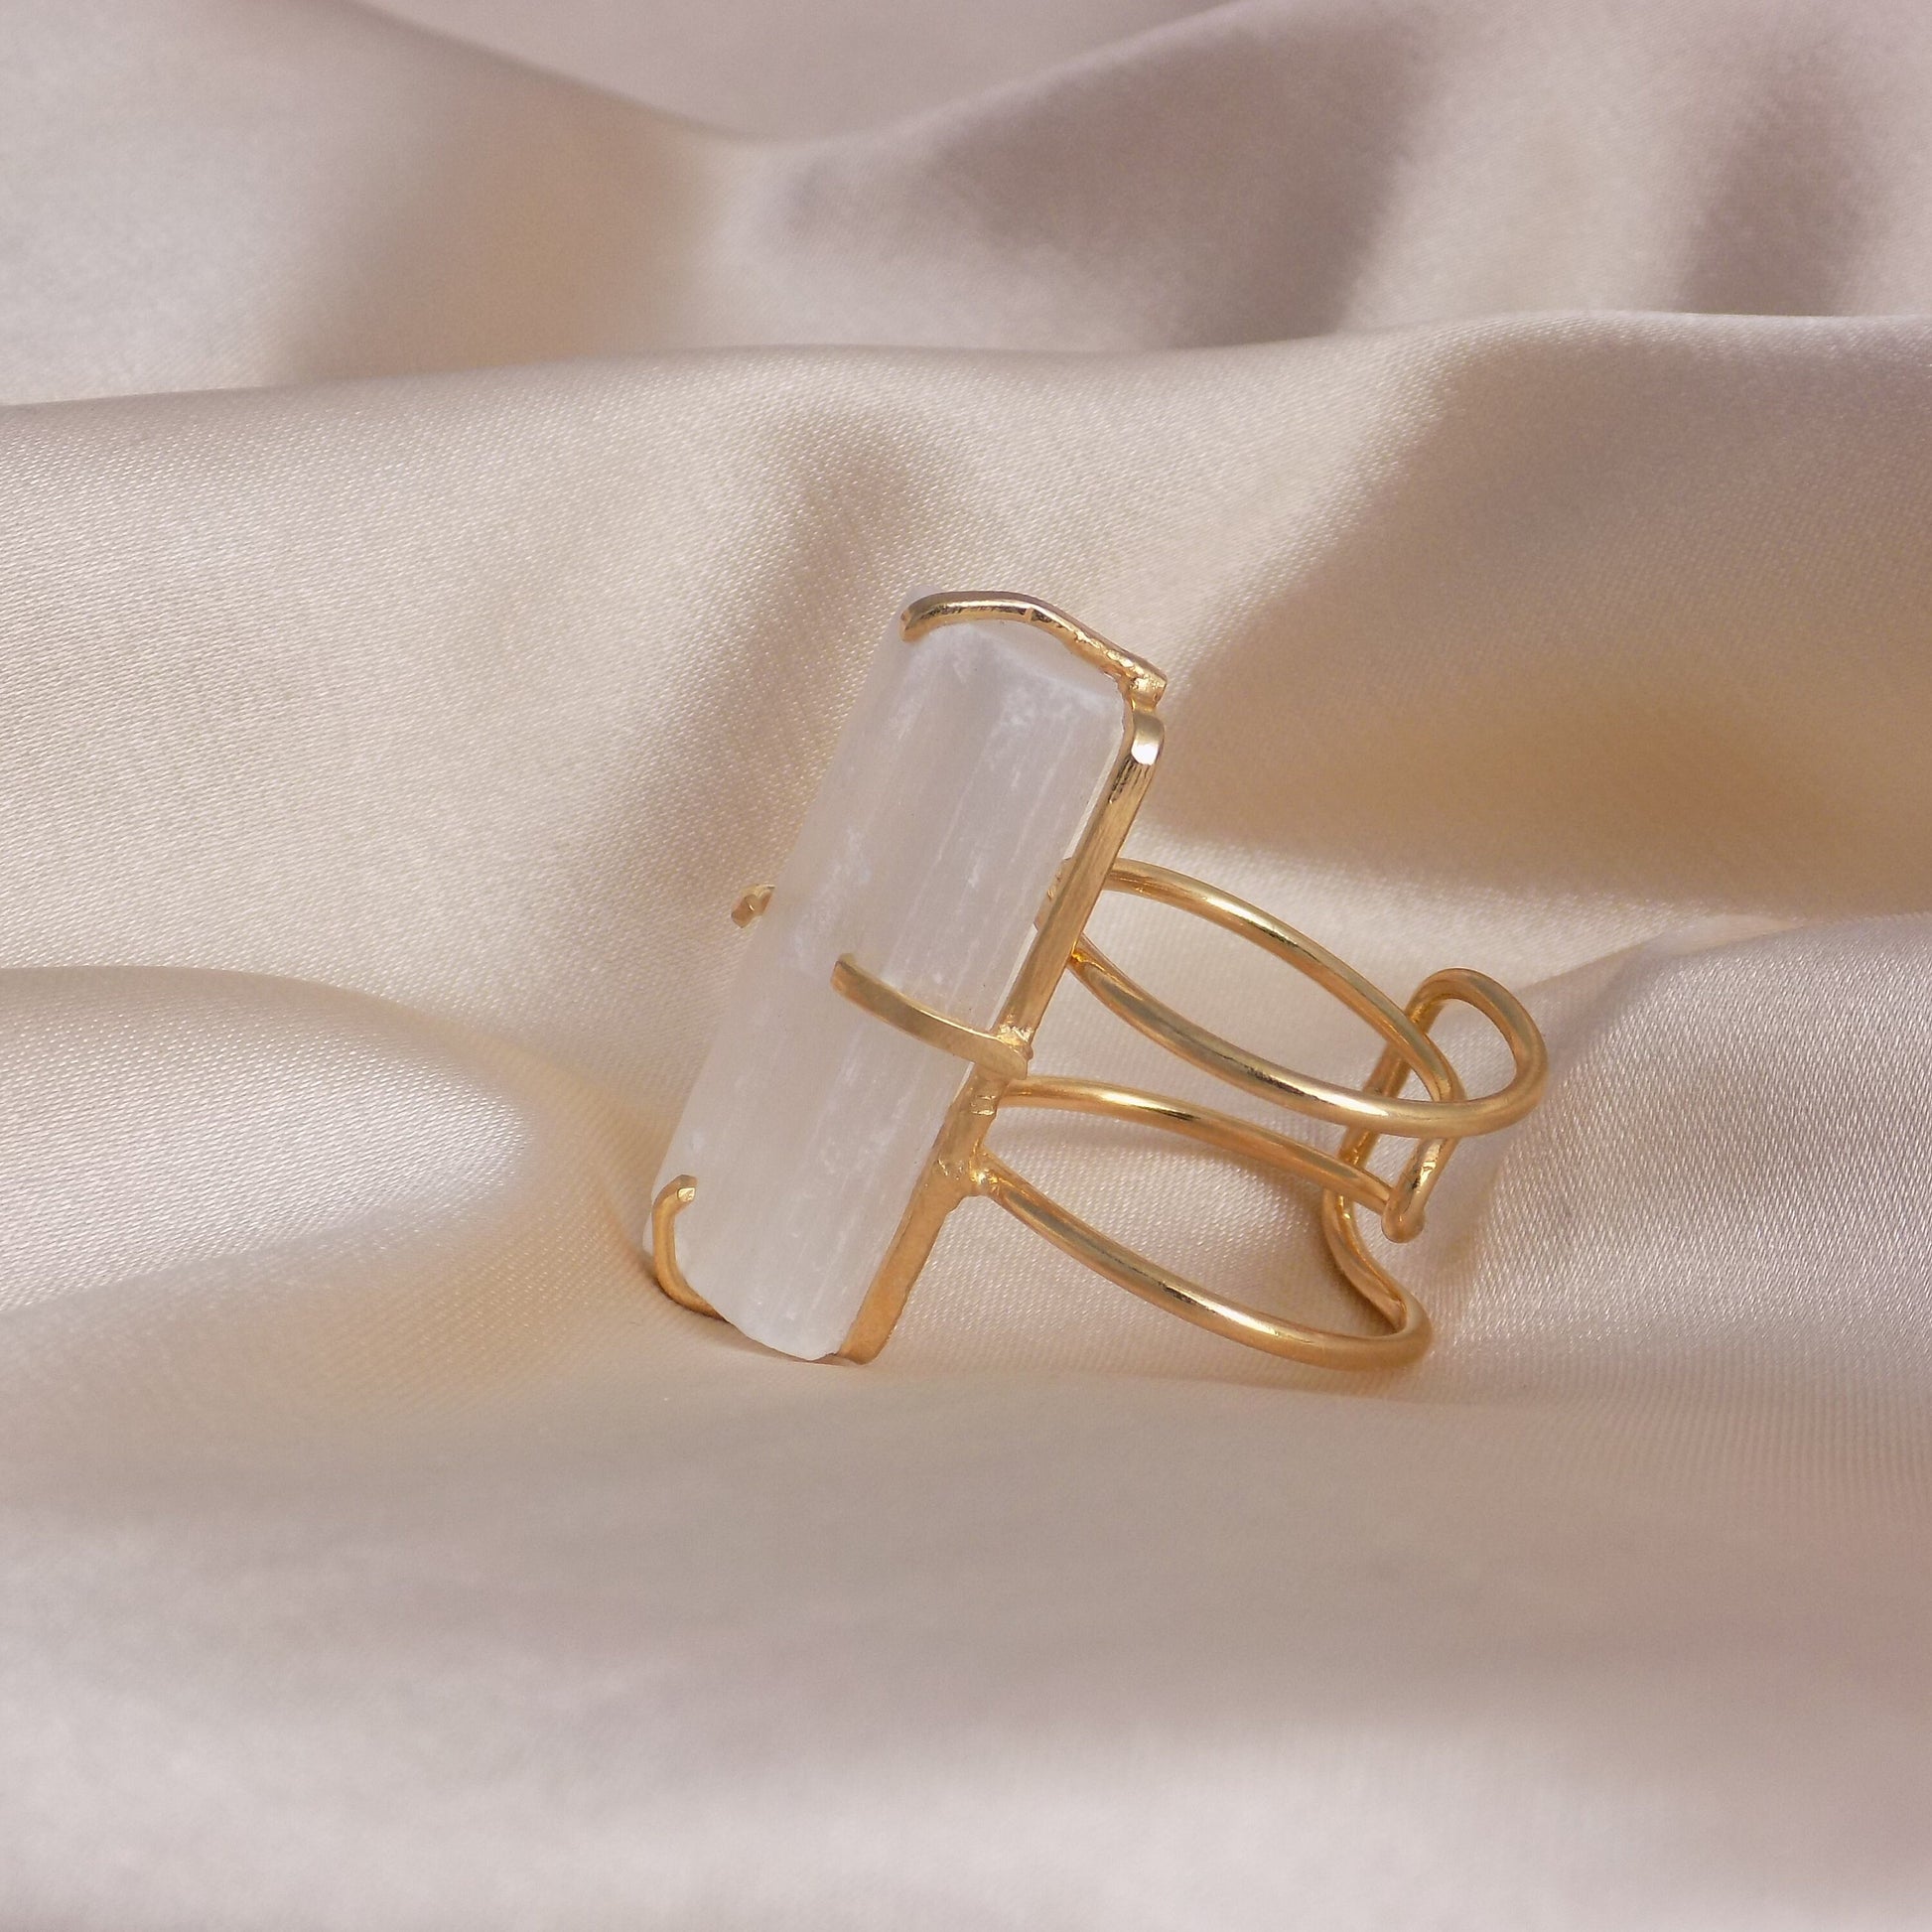 Christmas Gift - White Selenite Ring Gold Adjustable - Raw Crystal Jewelry - G15-242